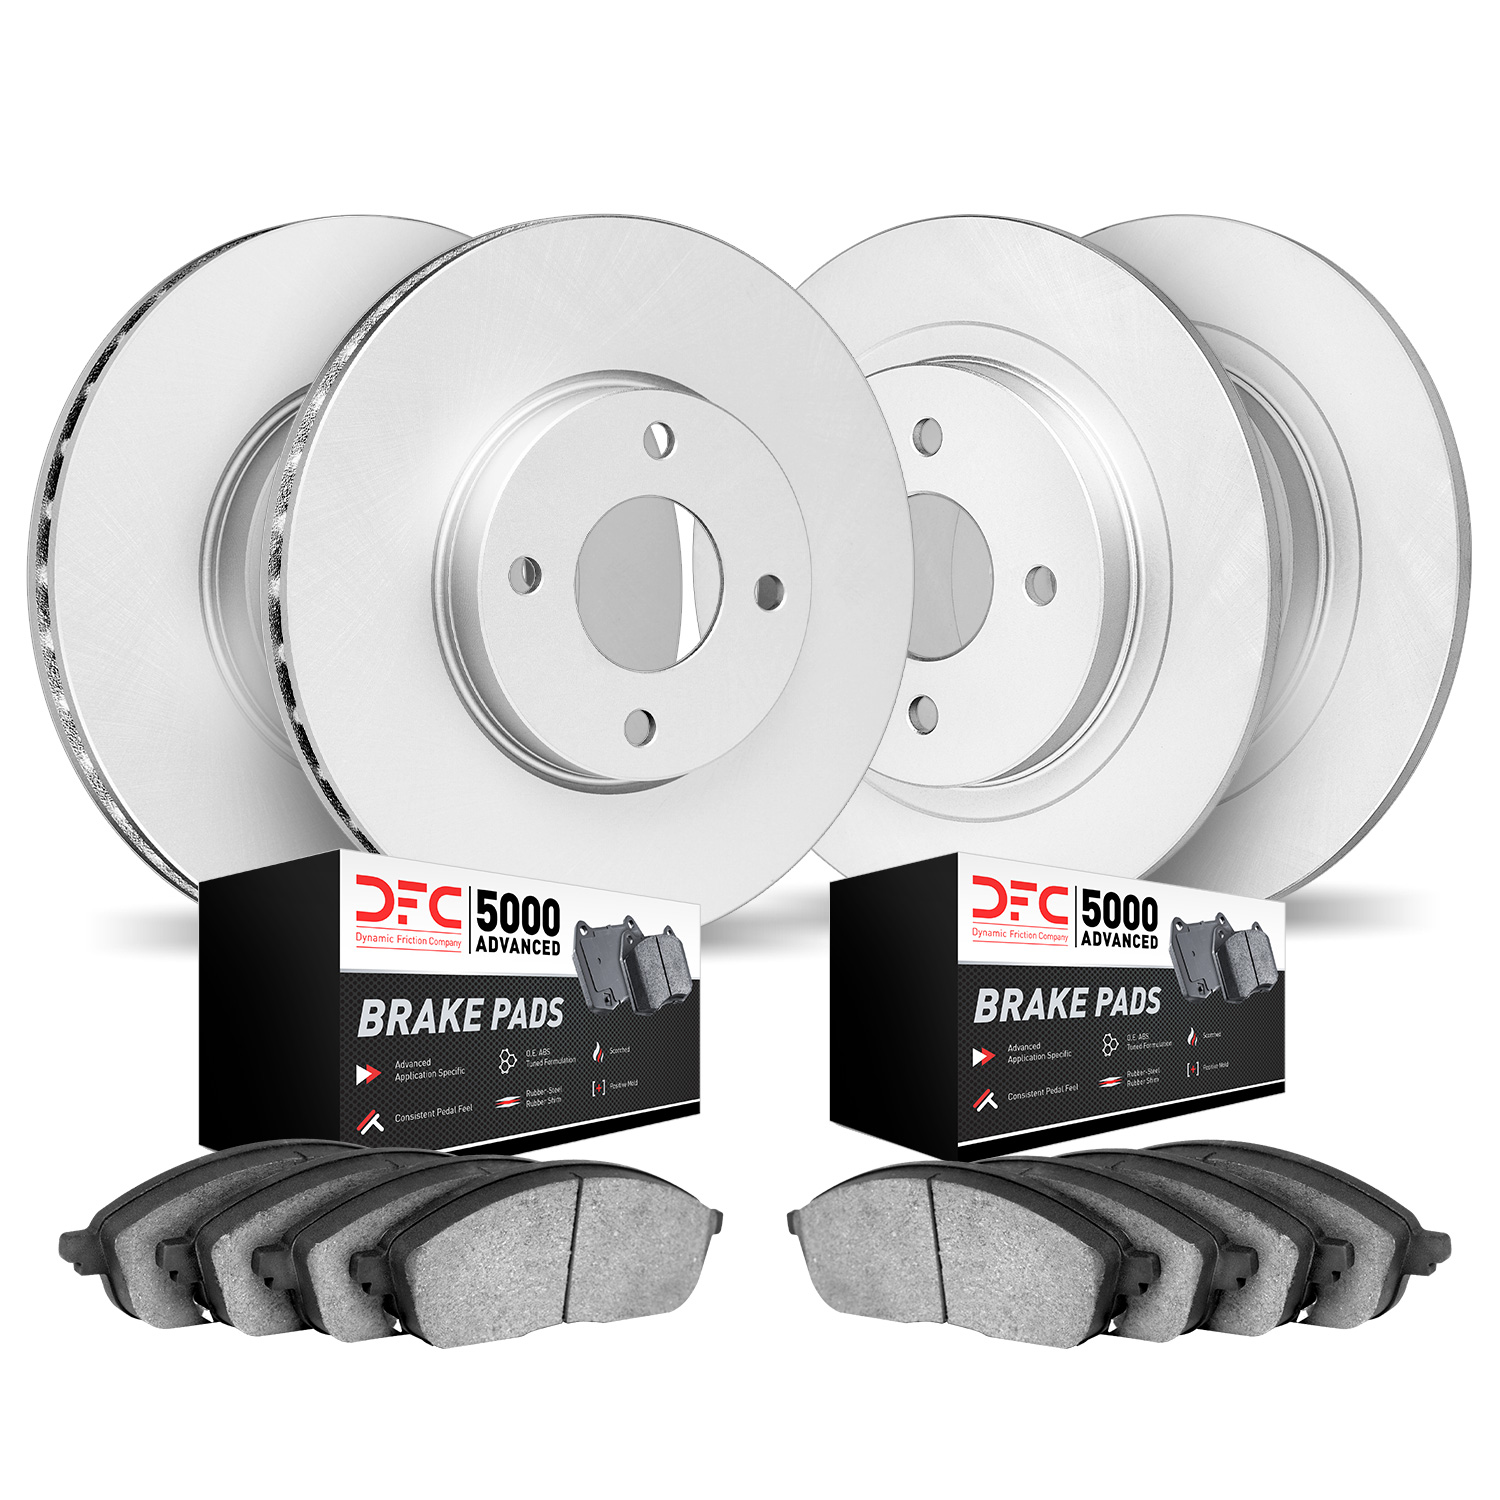 4504-80016 Geospec Brake Rotors w/5000 Advanced Brake Pads Kit, Fits Select Multiple Makes/Models, Position: Front and Rear